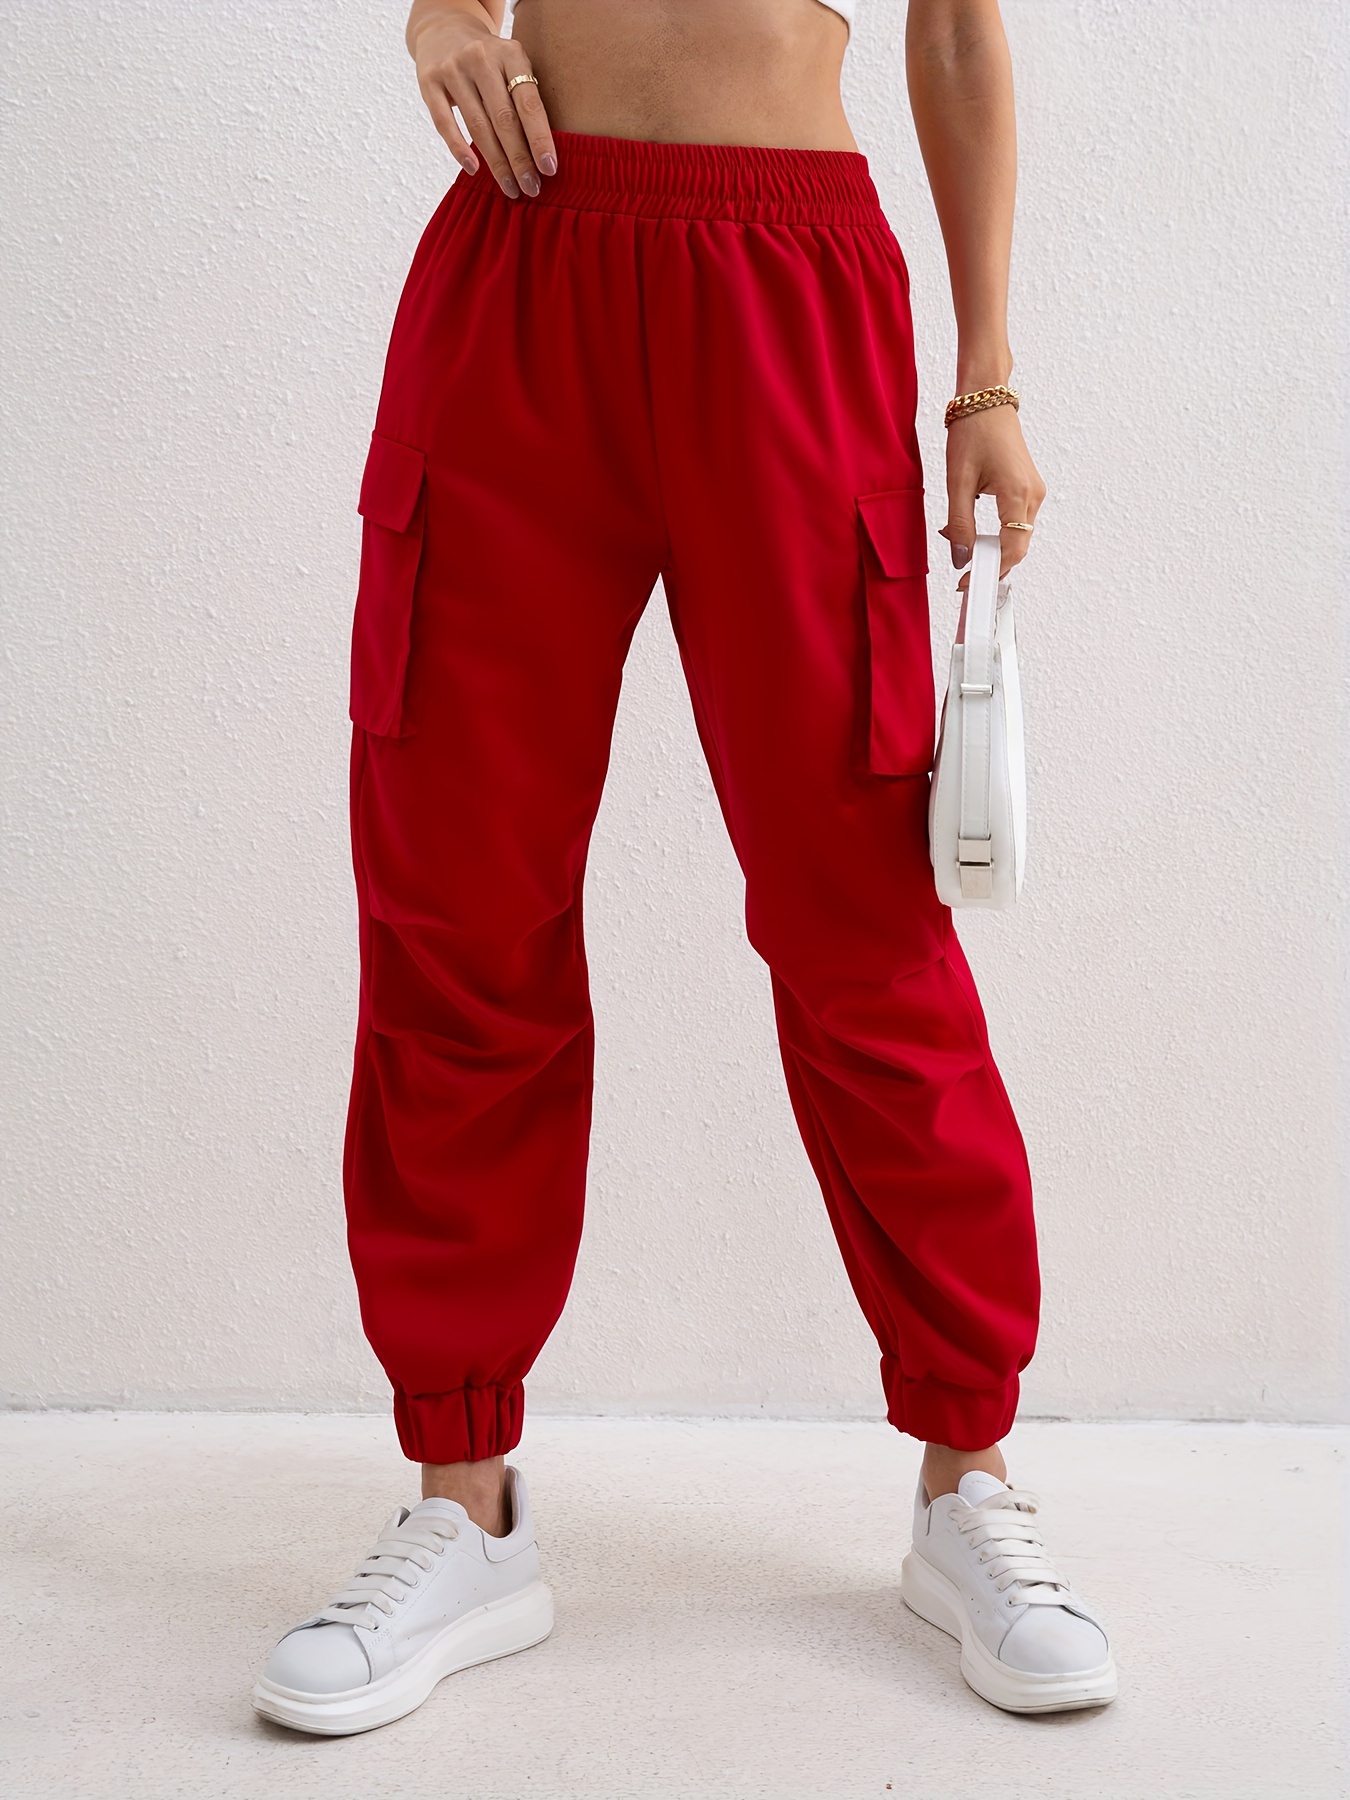 ALWAYS Women's Super Soft Casual Cargo Jogger Pants Red S 